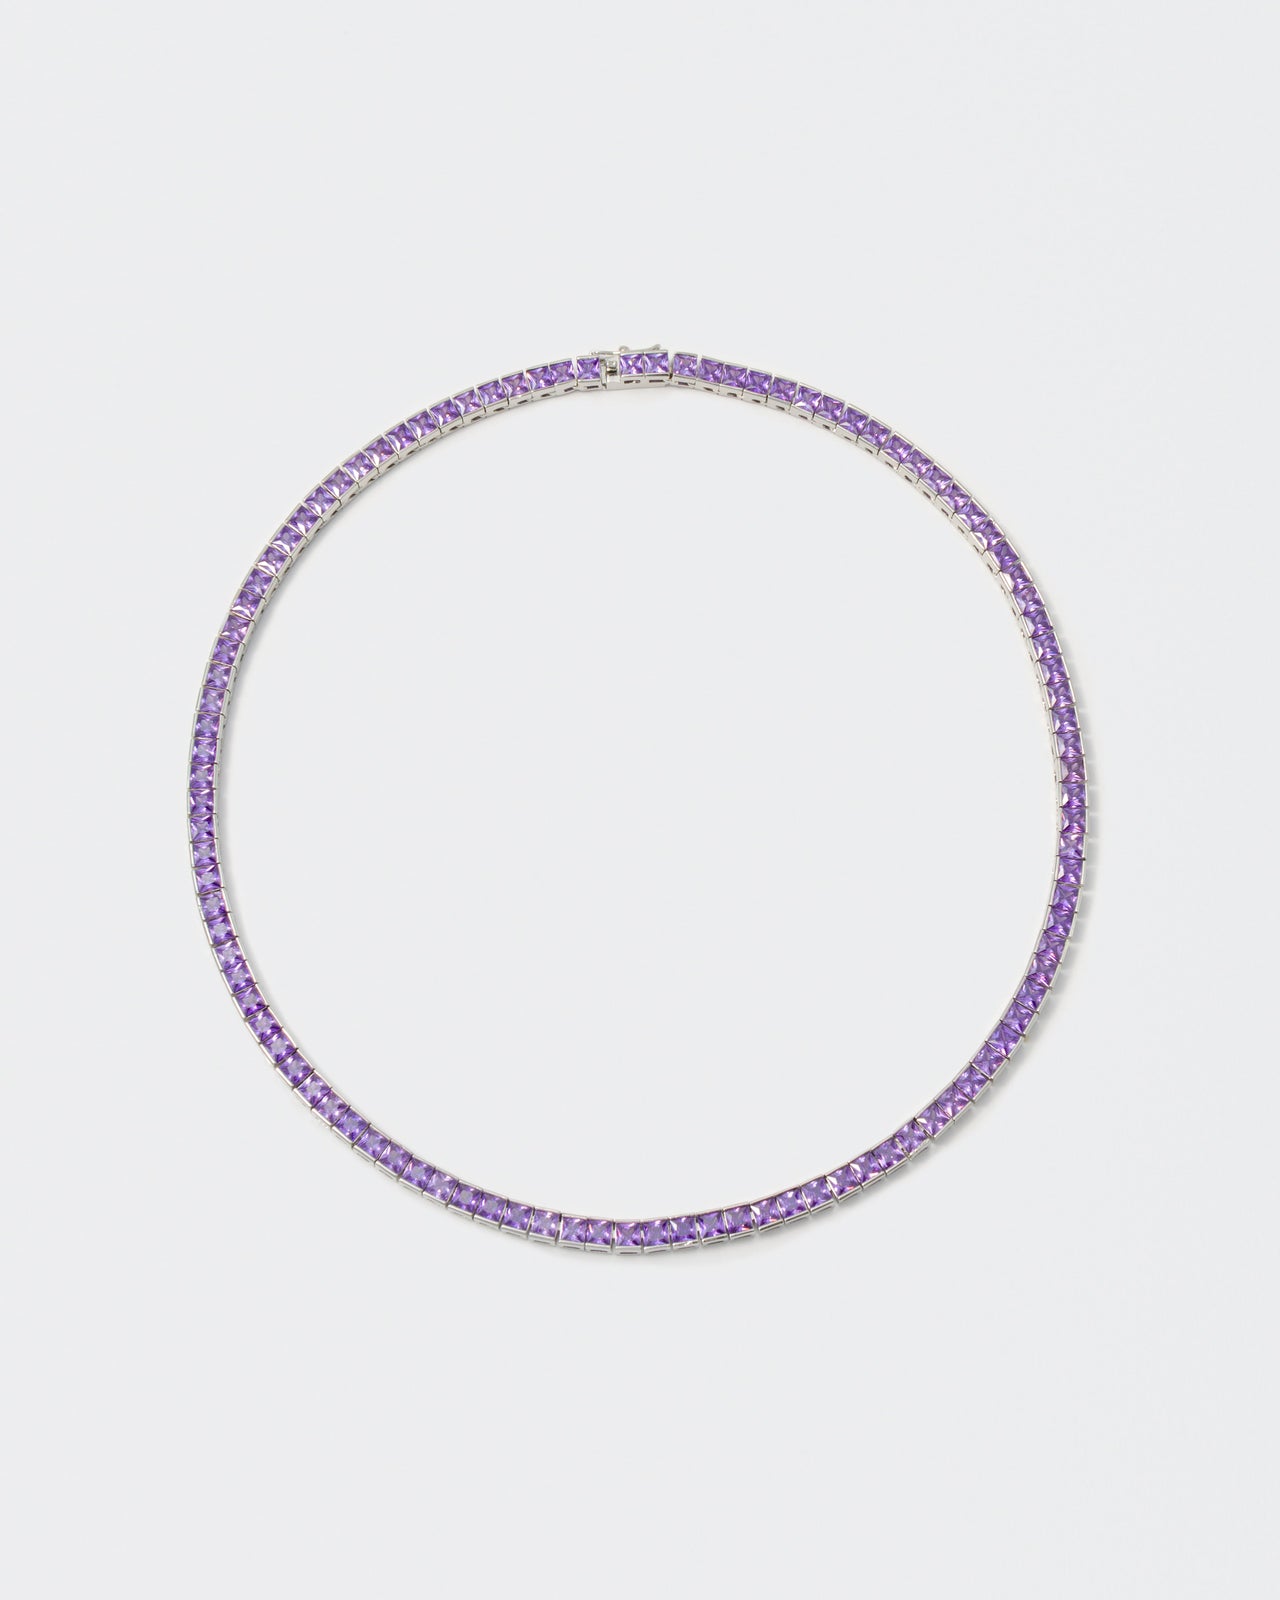 18k white gold coated tennis chain necklace with hand-set princess-cut stones in amethyst purple